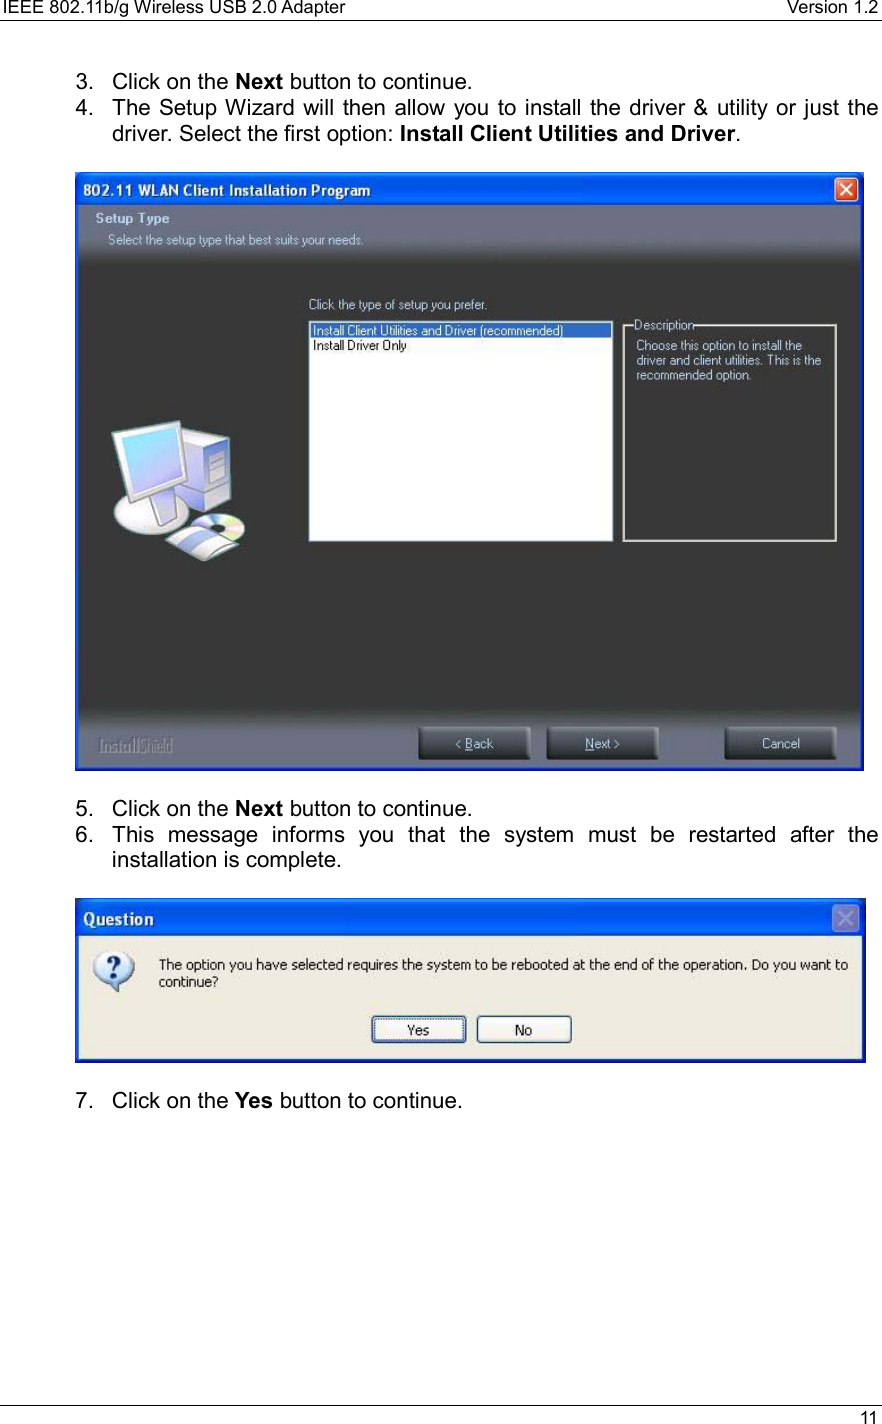 IEEE 802.11b/g Wireless USB 2.0 Adapter    Version 1.2   11  3.  Click on the Next button to continue.  4.  The Setup Wizard will then allow you to install the driver &amp; utility or just the driver. Select the first option: Install Client Utilities and Driver.     5.  Click on the Next button to continue.  6.  This message informs you that the system must be restarted after the installation is complete.     7.  Click on the Yes button to continue.    